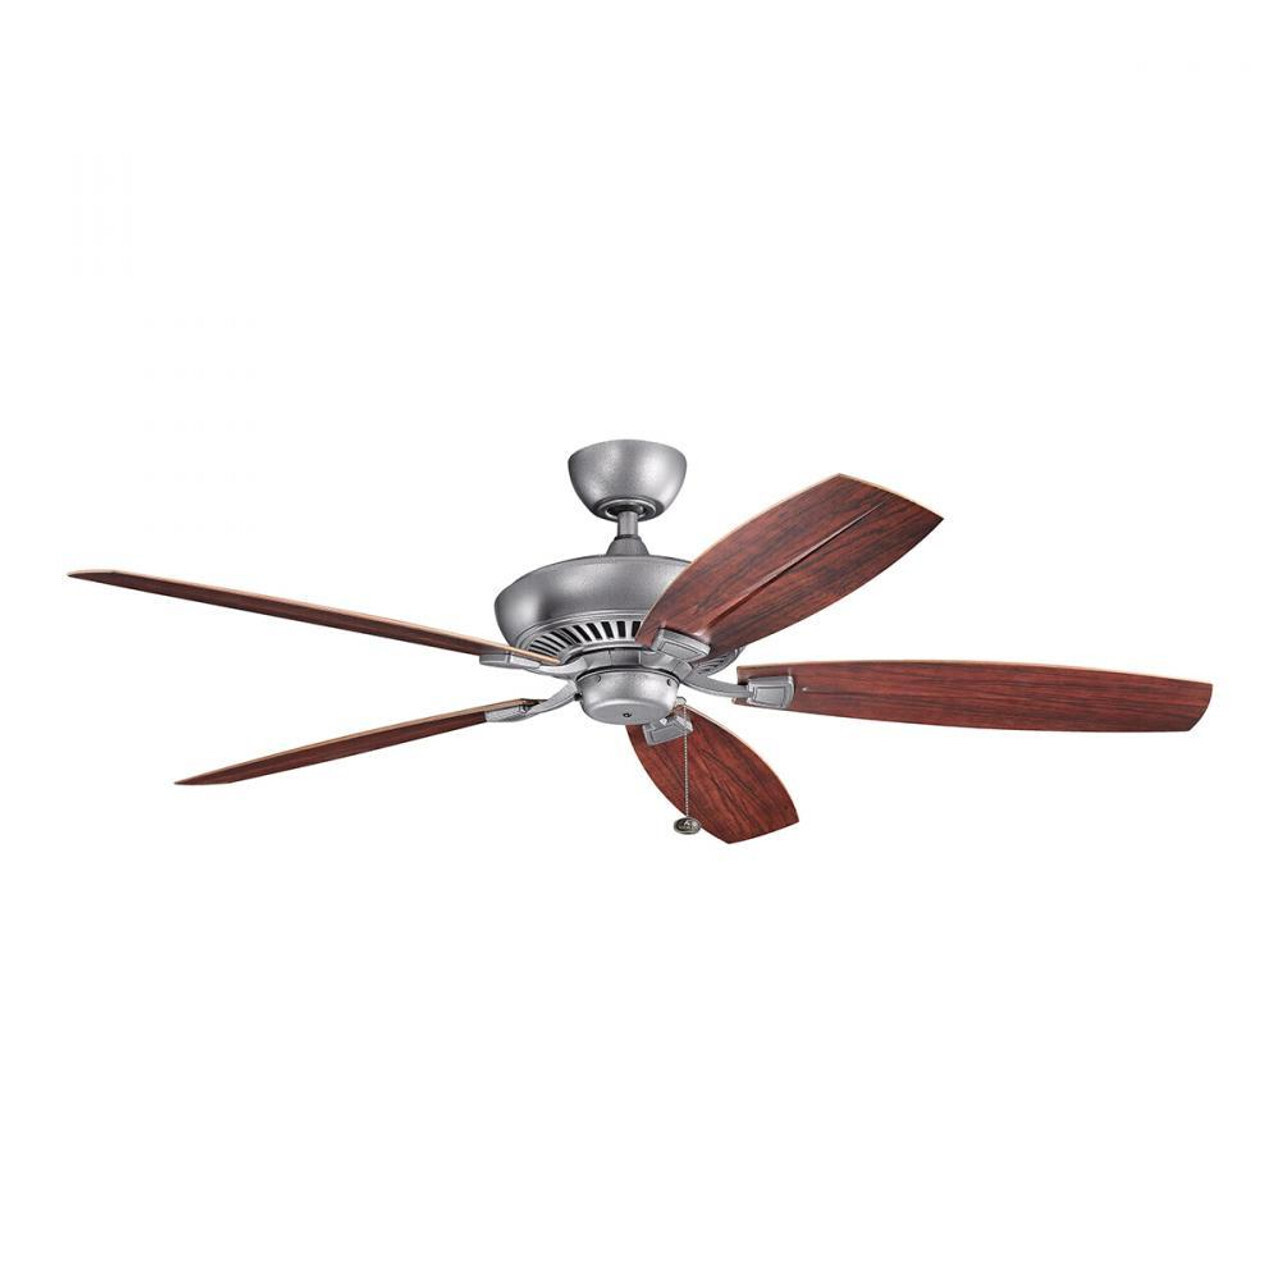 Canfield XL Patio 60" Outdoor Ceiling Fan, Weathered Steel Powder Coat with Teak Blades CFM 6678